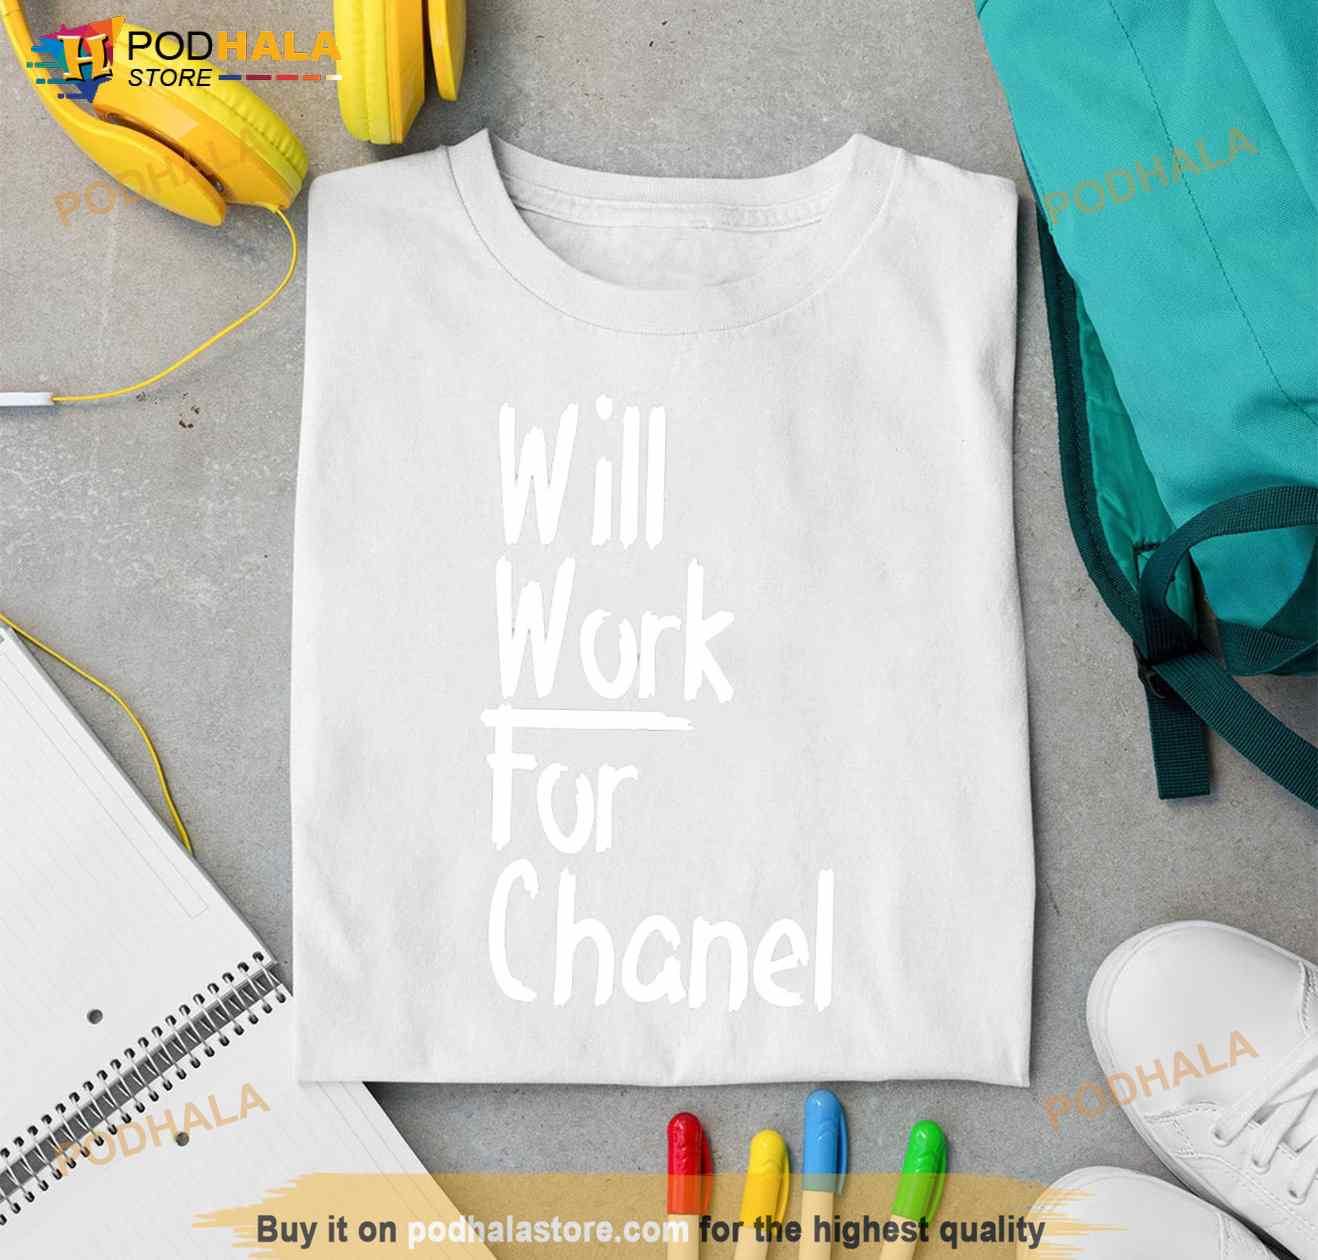 Will work for chanel shirt hoodie sweater long sleeve and tank top